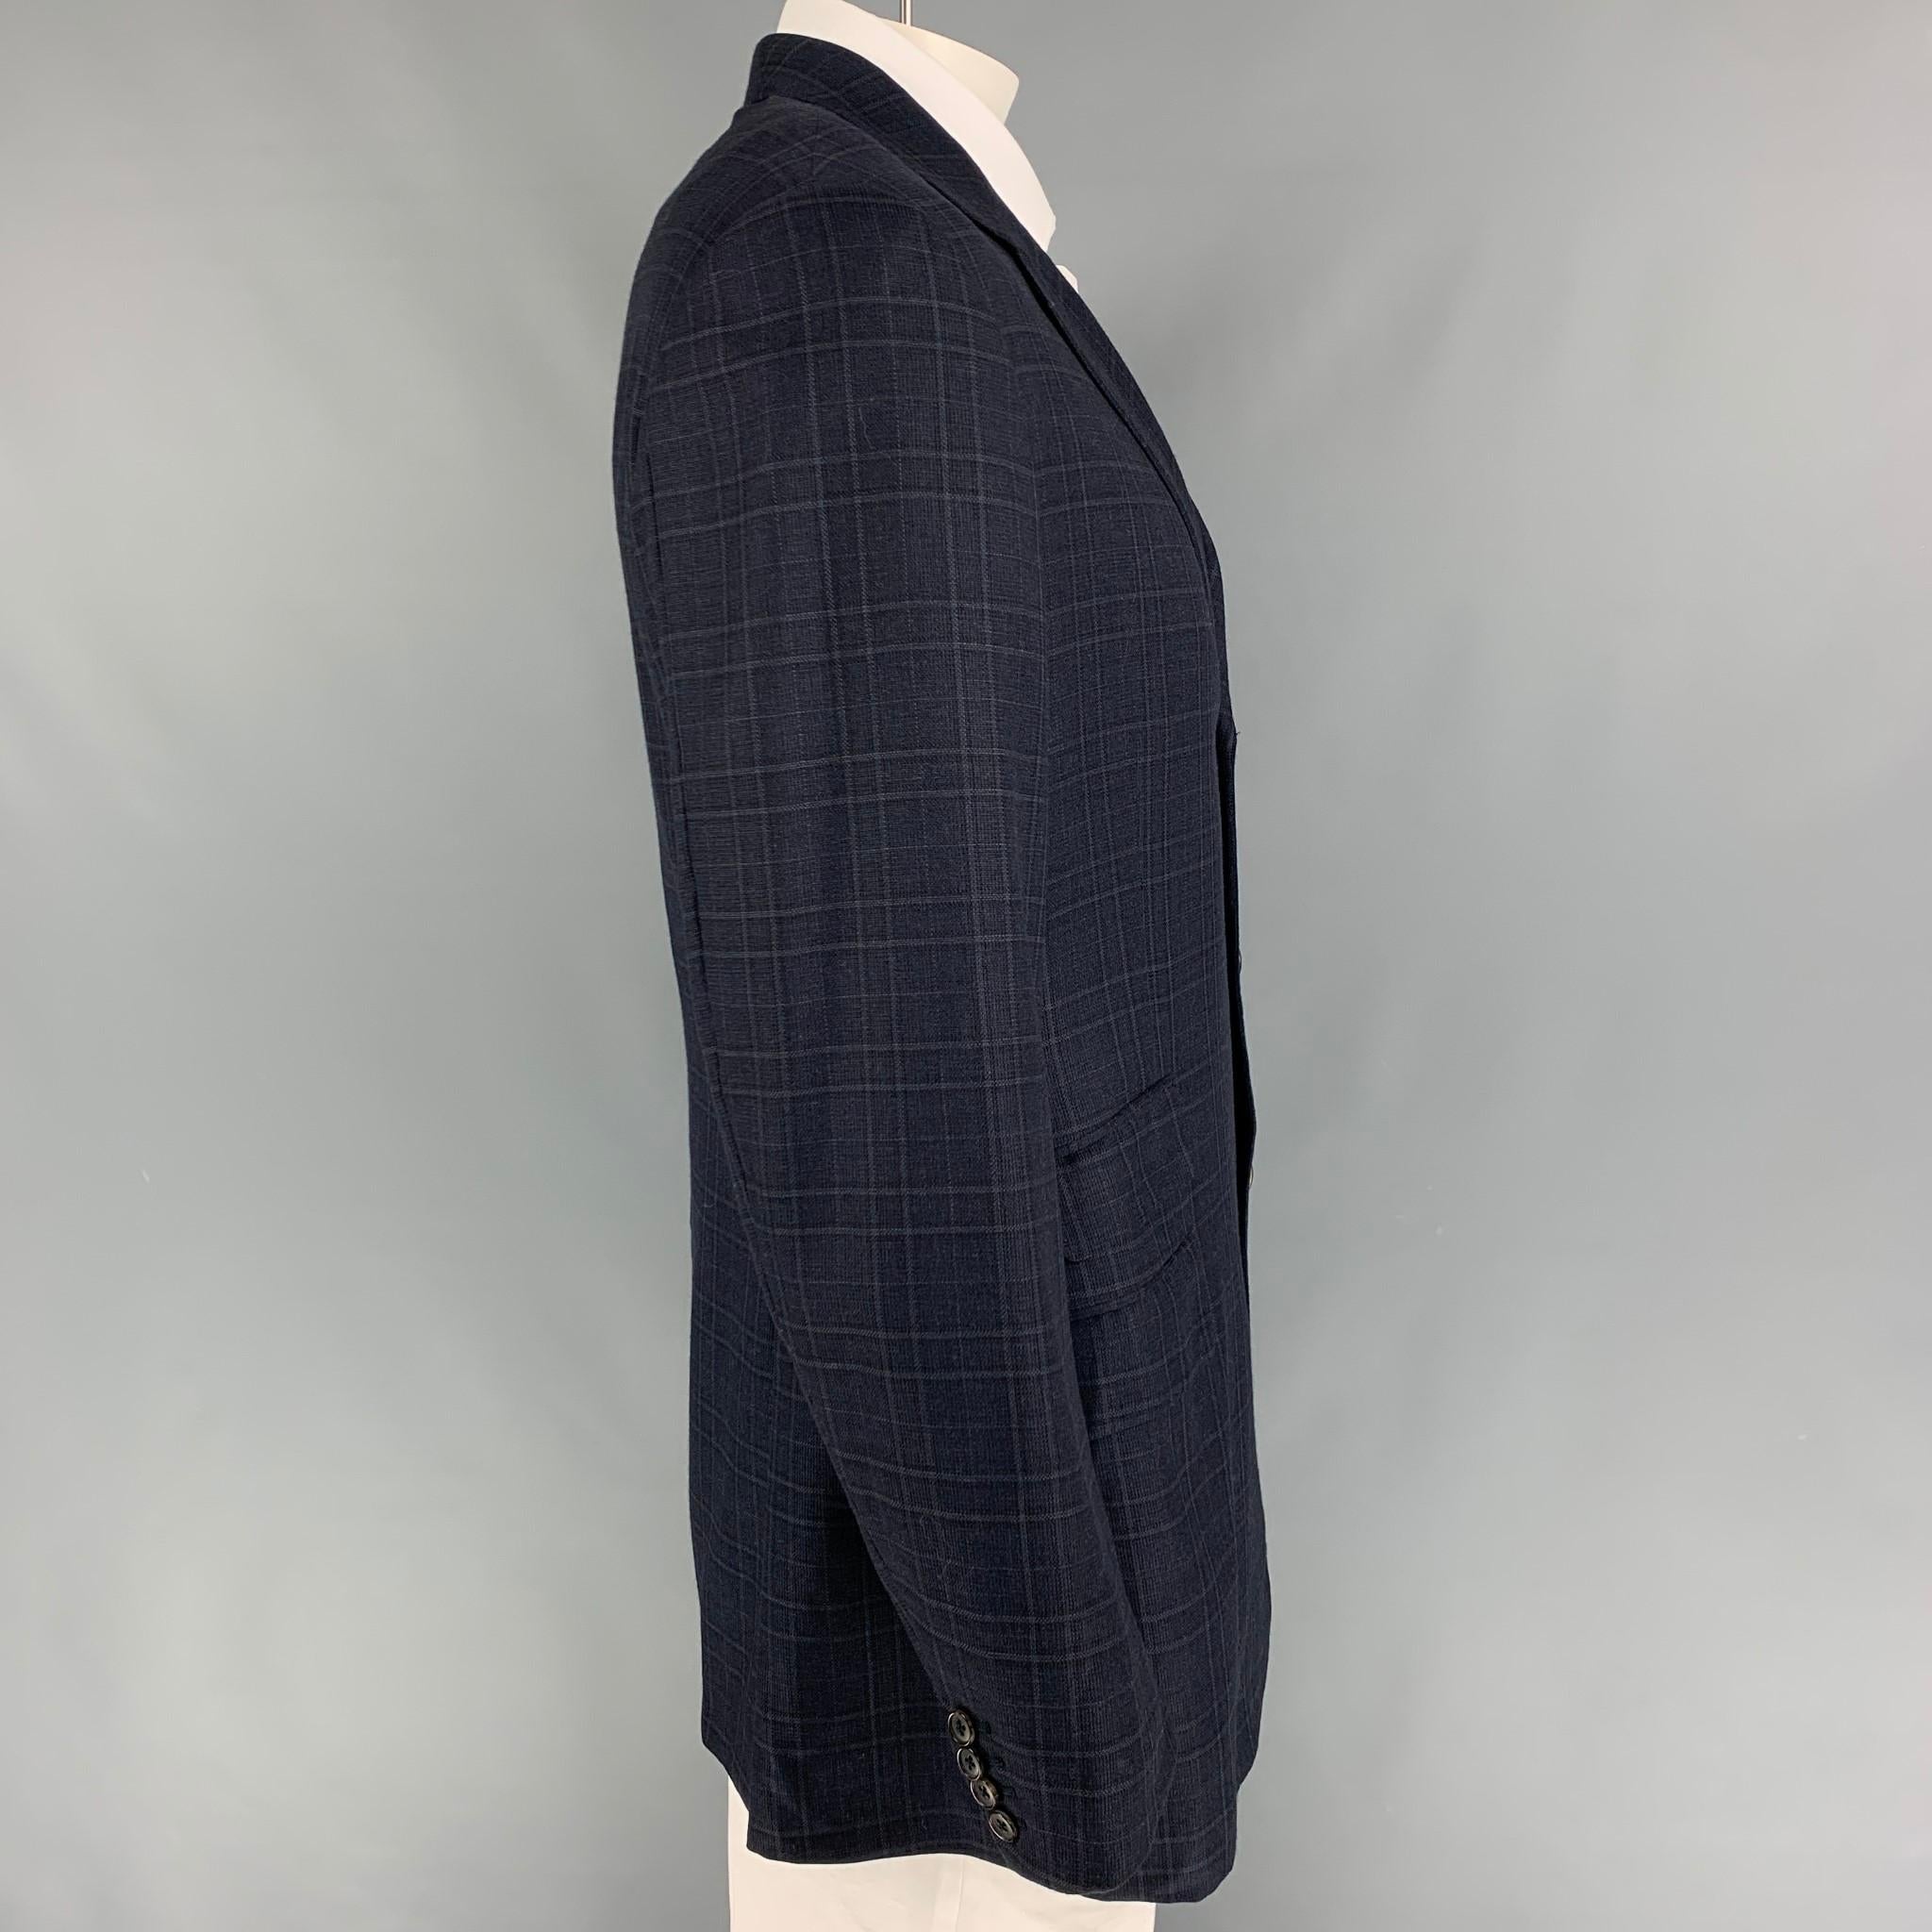 HERMES sport coat comes in a navy & grey plaid wool with a full liner featuring a notch lapel, flap pockets, double back vent, and a three button closure. Made in Italy. 

Very Good Pre-Owned Condition.
Marked: 56

Measurements:

Shoulder: 19.5